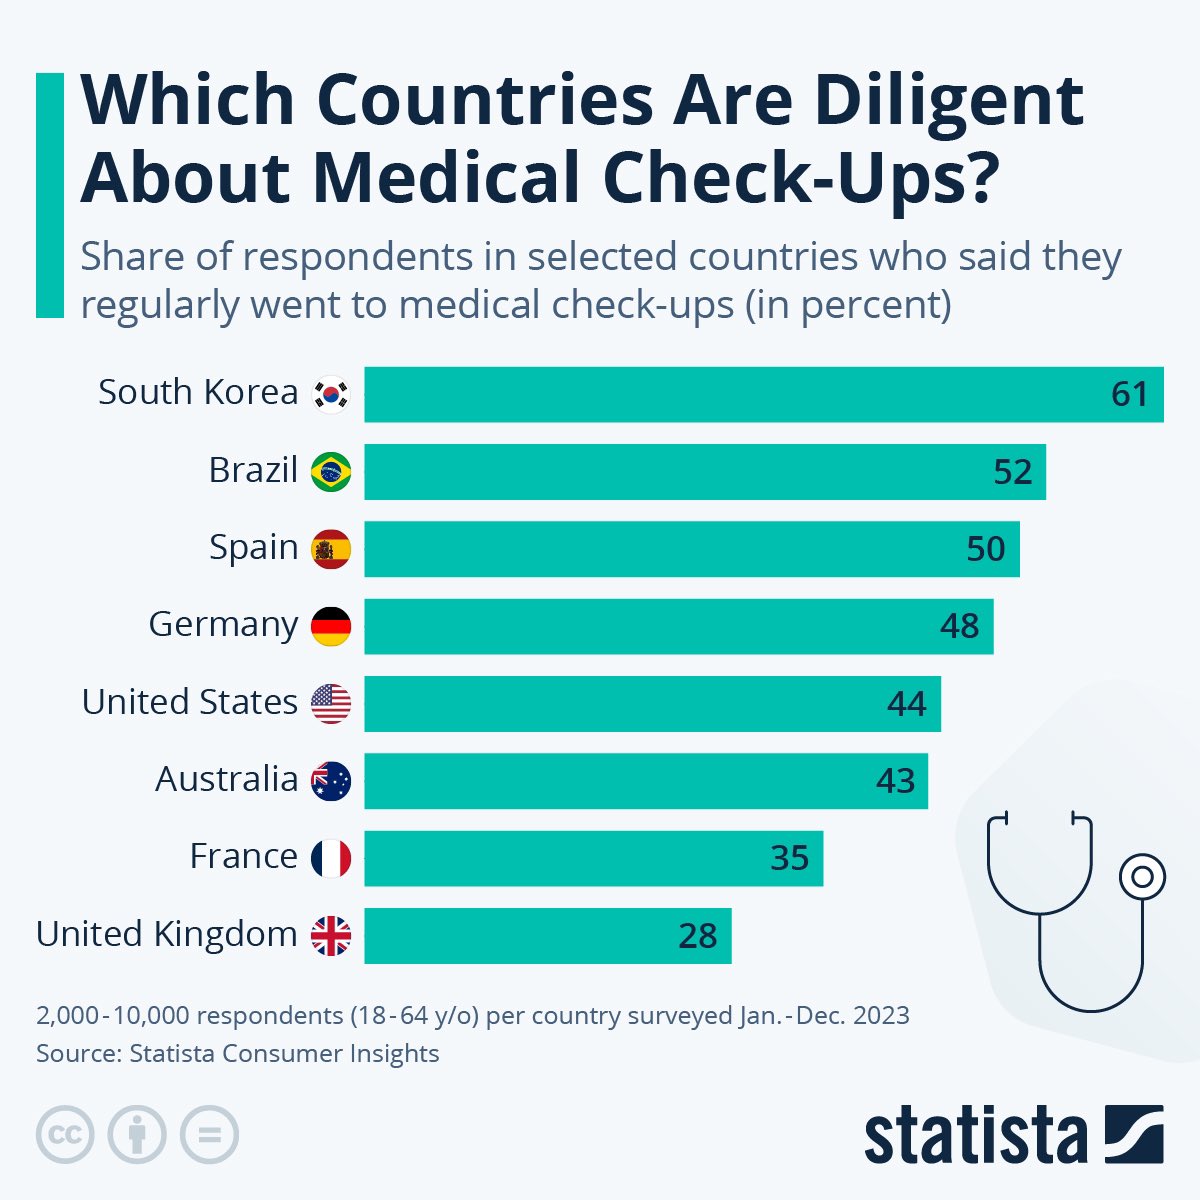 Prevention is always better than cure… But which countries are best at preventative medical checks? A survey by @StatistaCharts highlights the nations where regular medical check-ups are common practice. Leading the way globally are South Korea 🇰🇷 (61%) & Brazil 🇧🇷 (52%) - in